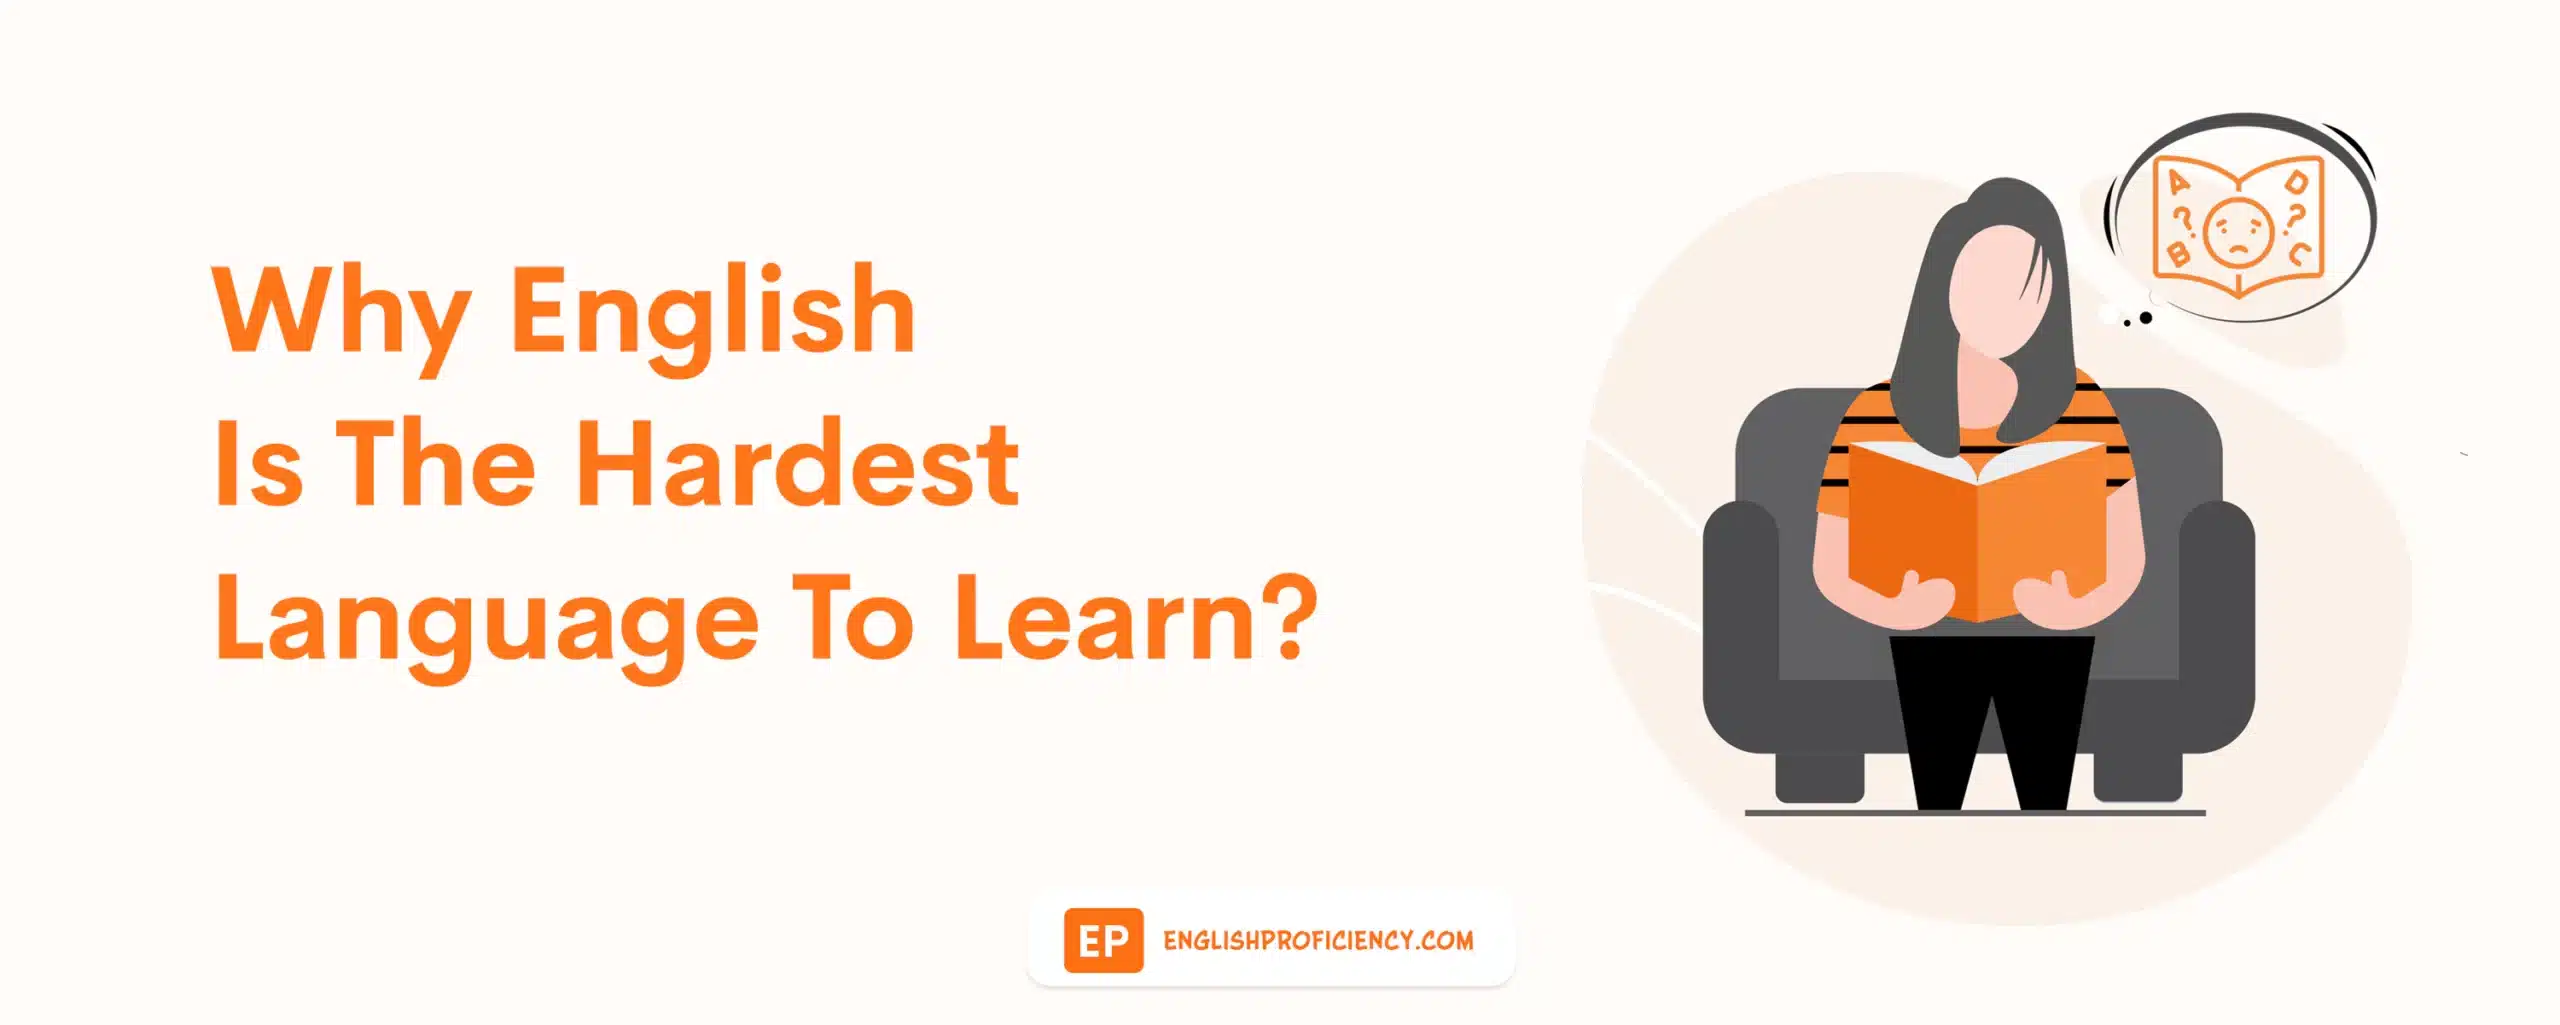 Why English is the Hardest Language to Learn